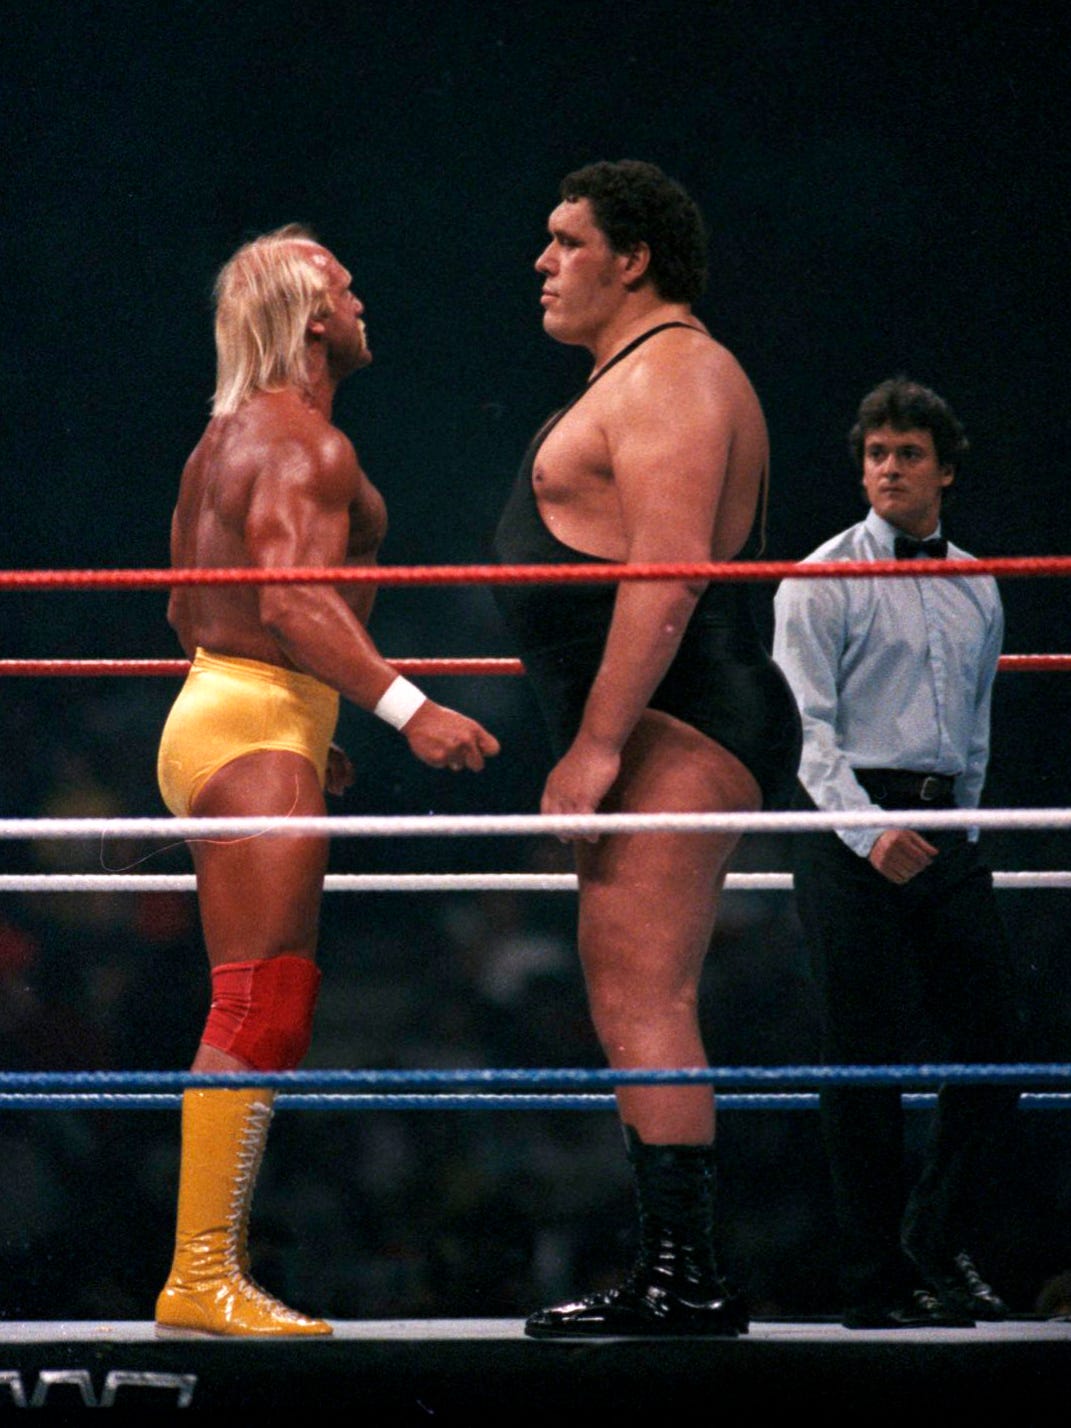 Hulk Hogan, left, and Andre the Giant wrestled in the main event at WrestleMania III on Sunday, March 29, 1987, at the Silverdome in Pontiac. It's considered one of the most famous wrestling matches of all-time.